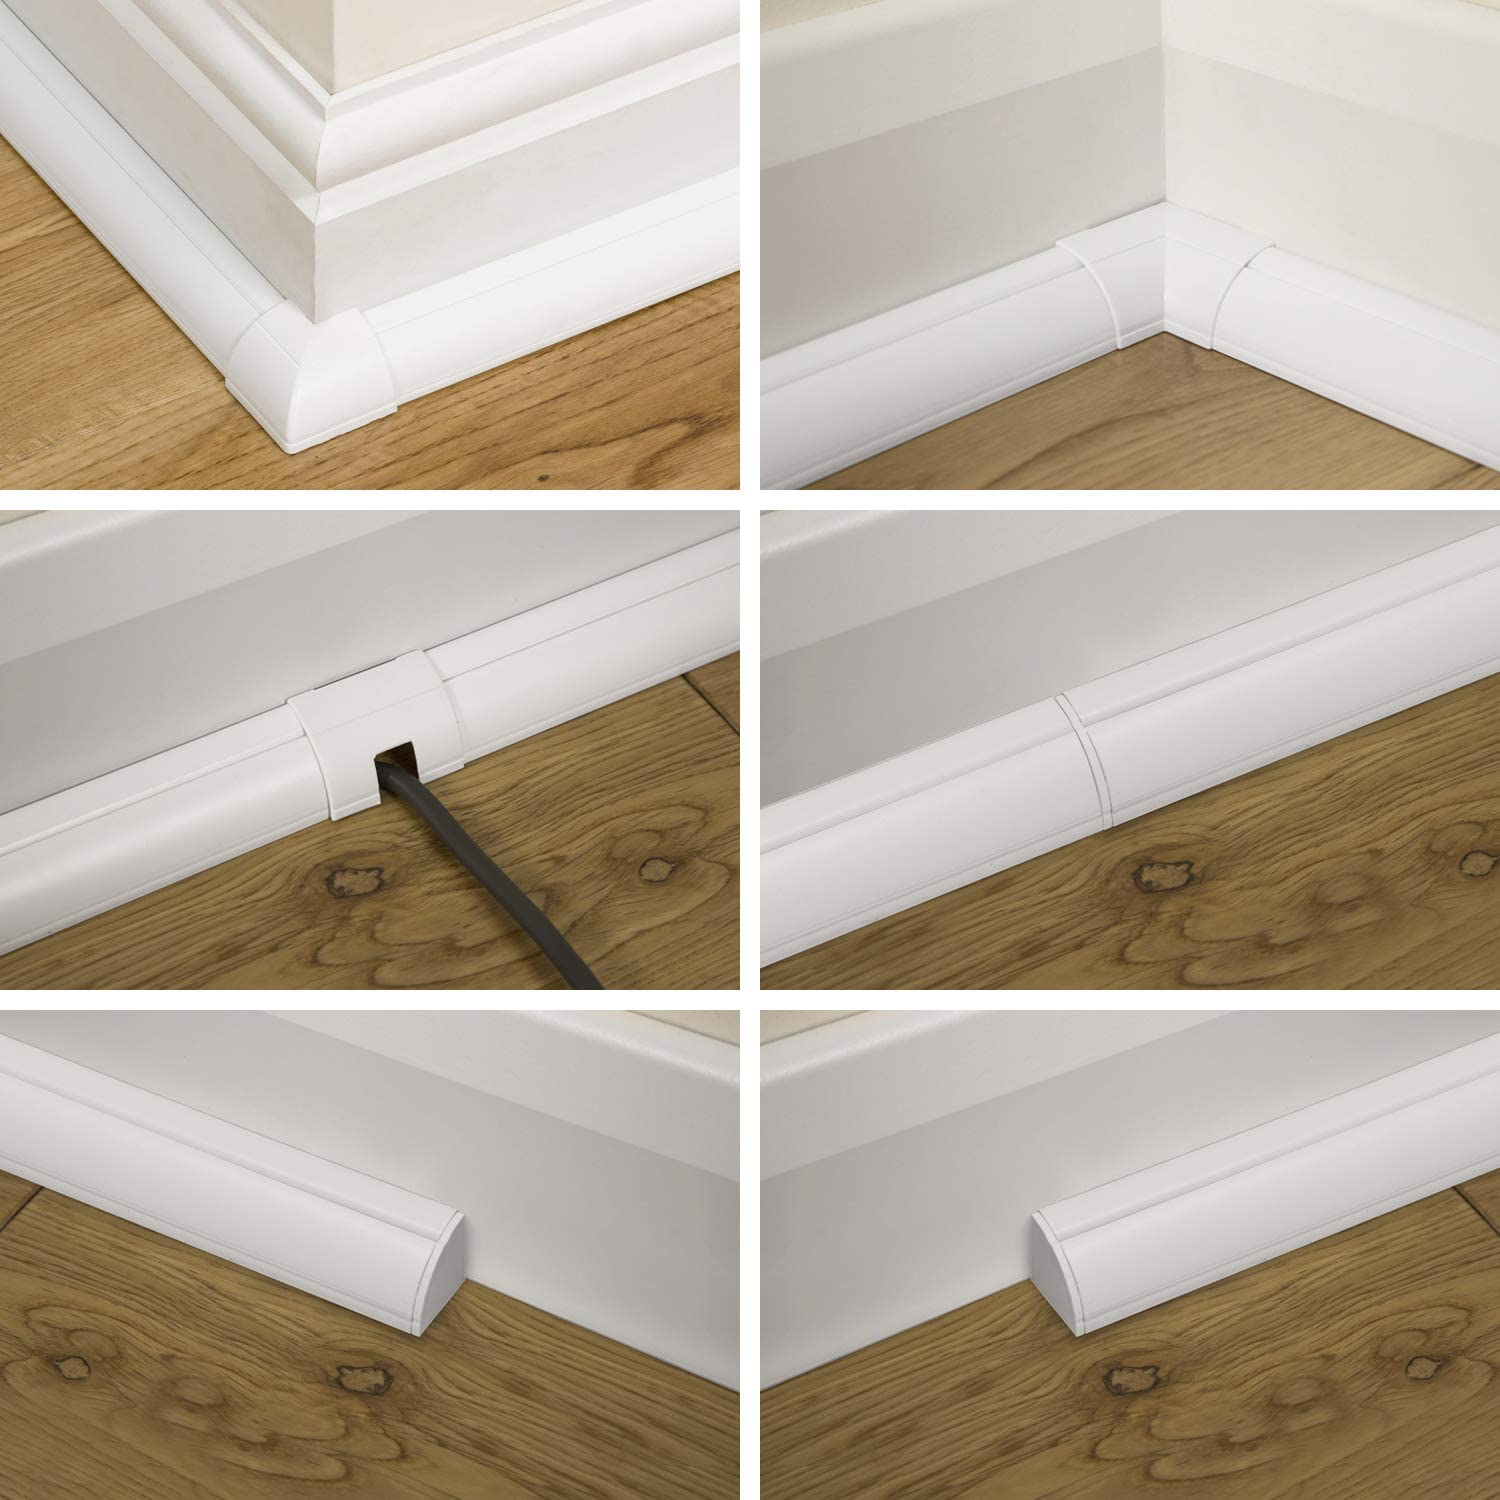 How to hide wiring behind baseboard or install a raceway